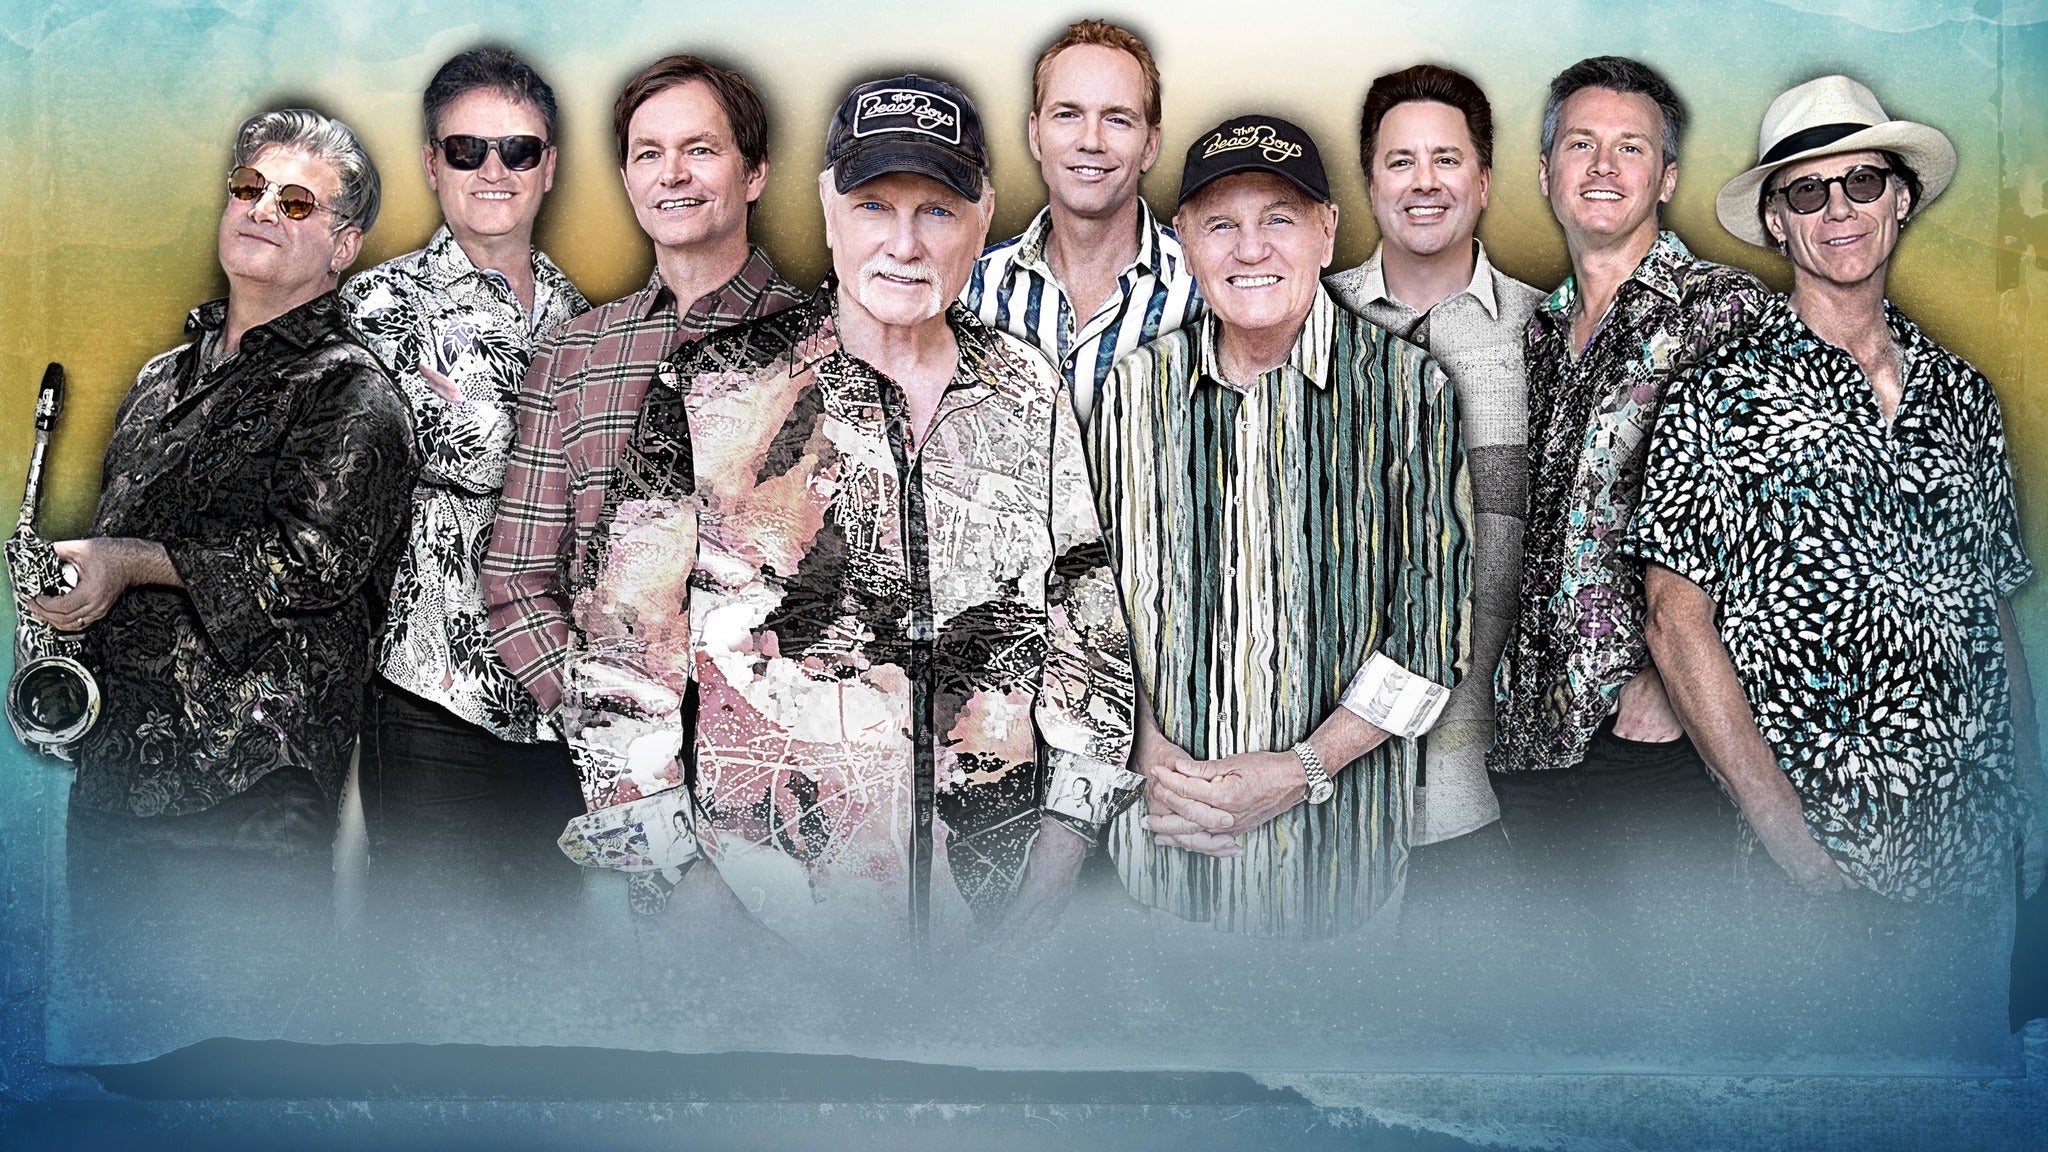 The Beach Boys - Sixty Years of the Sounds of Summer in Sugar Land promo photo for Venue presale offer code